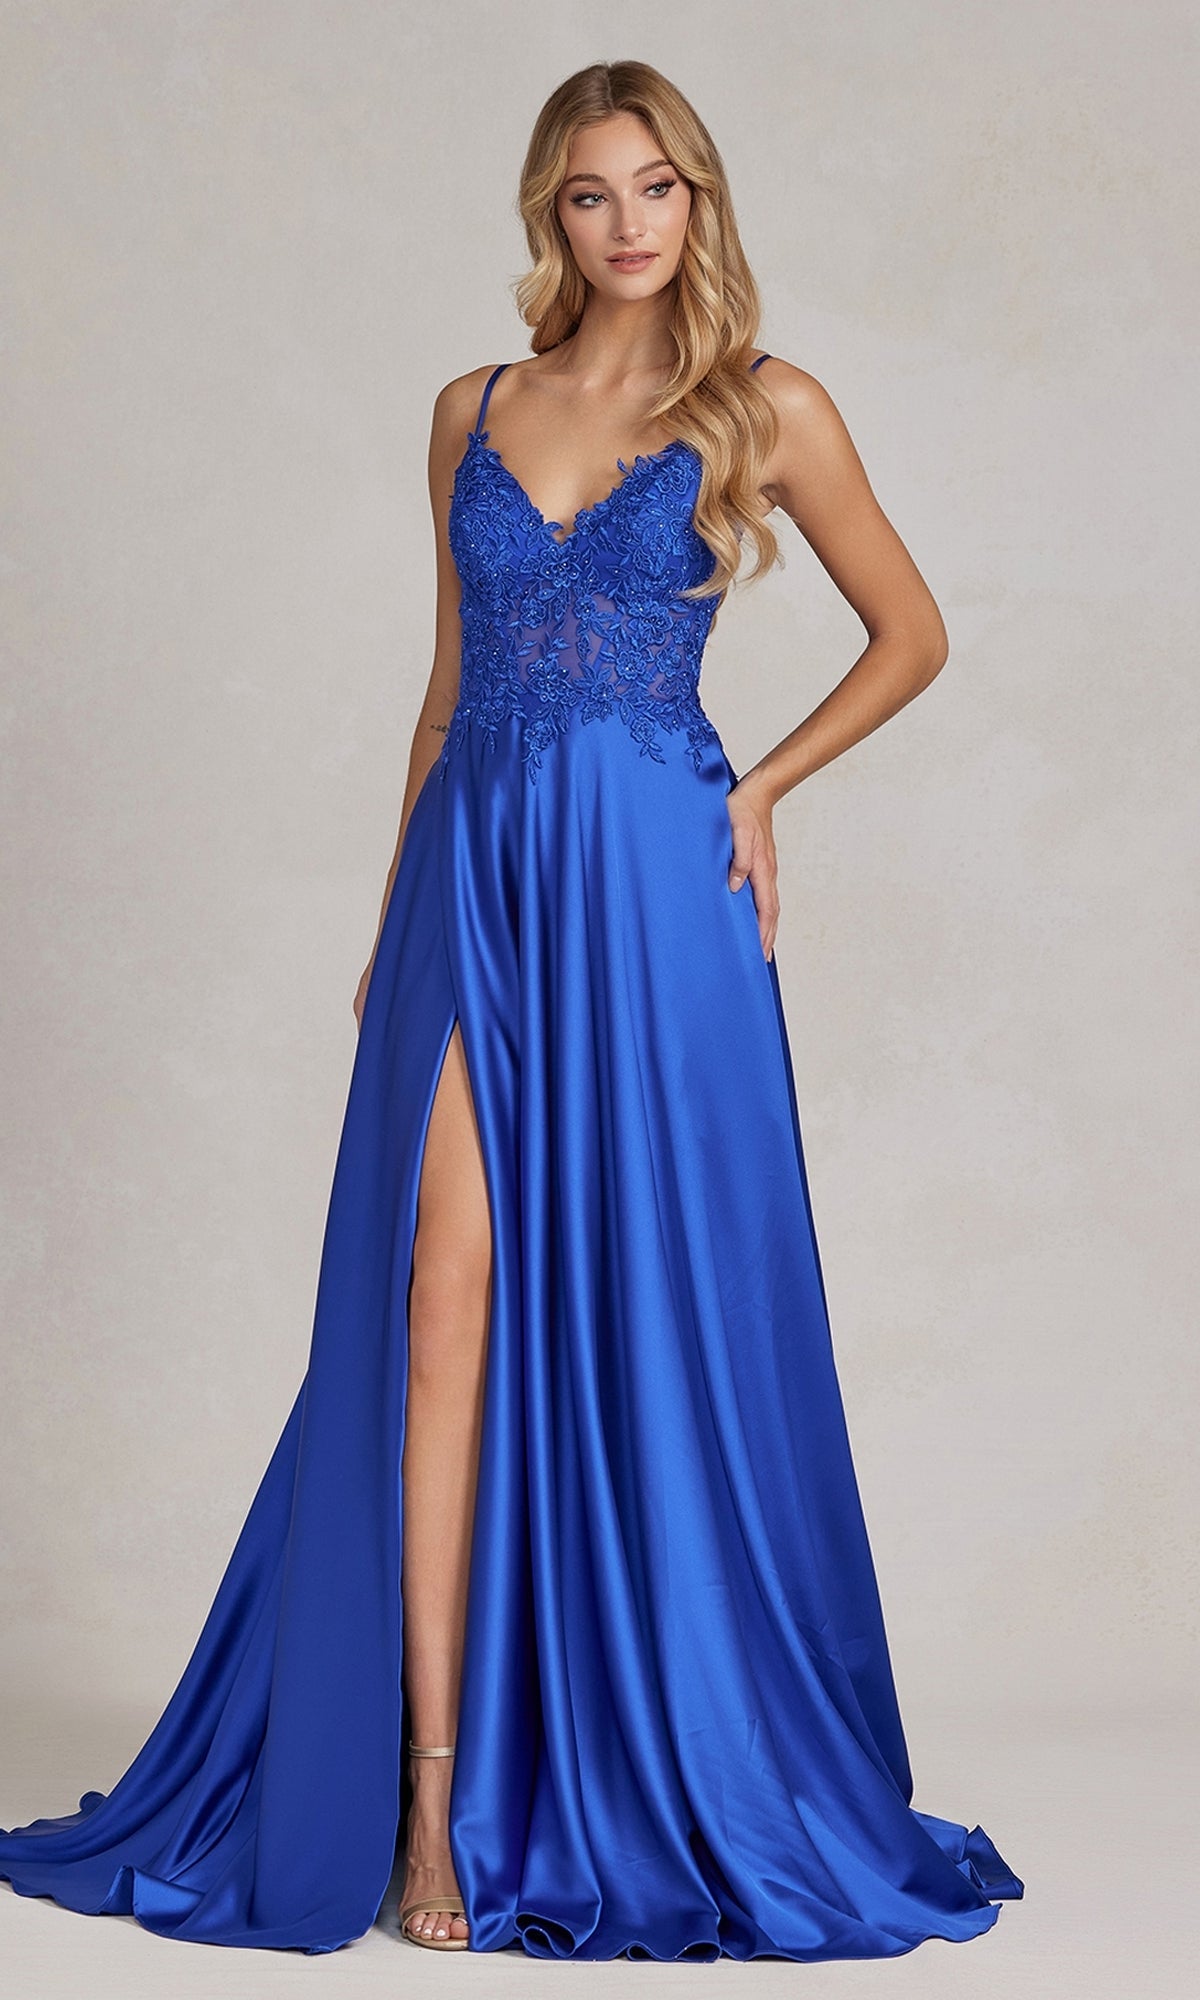 Royal Blue Long A-Line Prom Dress with Sheer-Lace Bodice